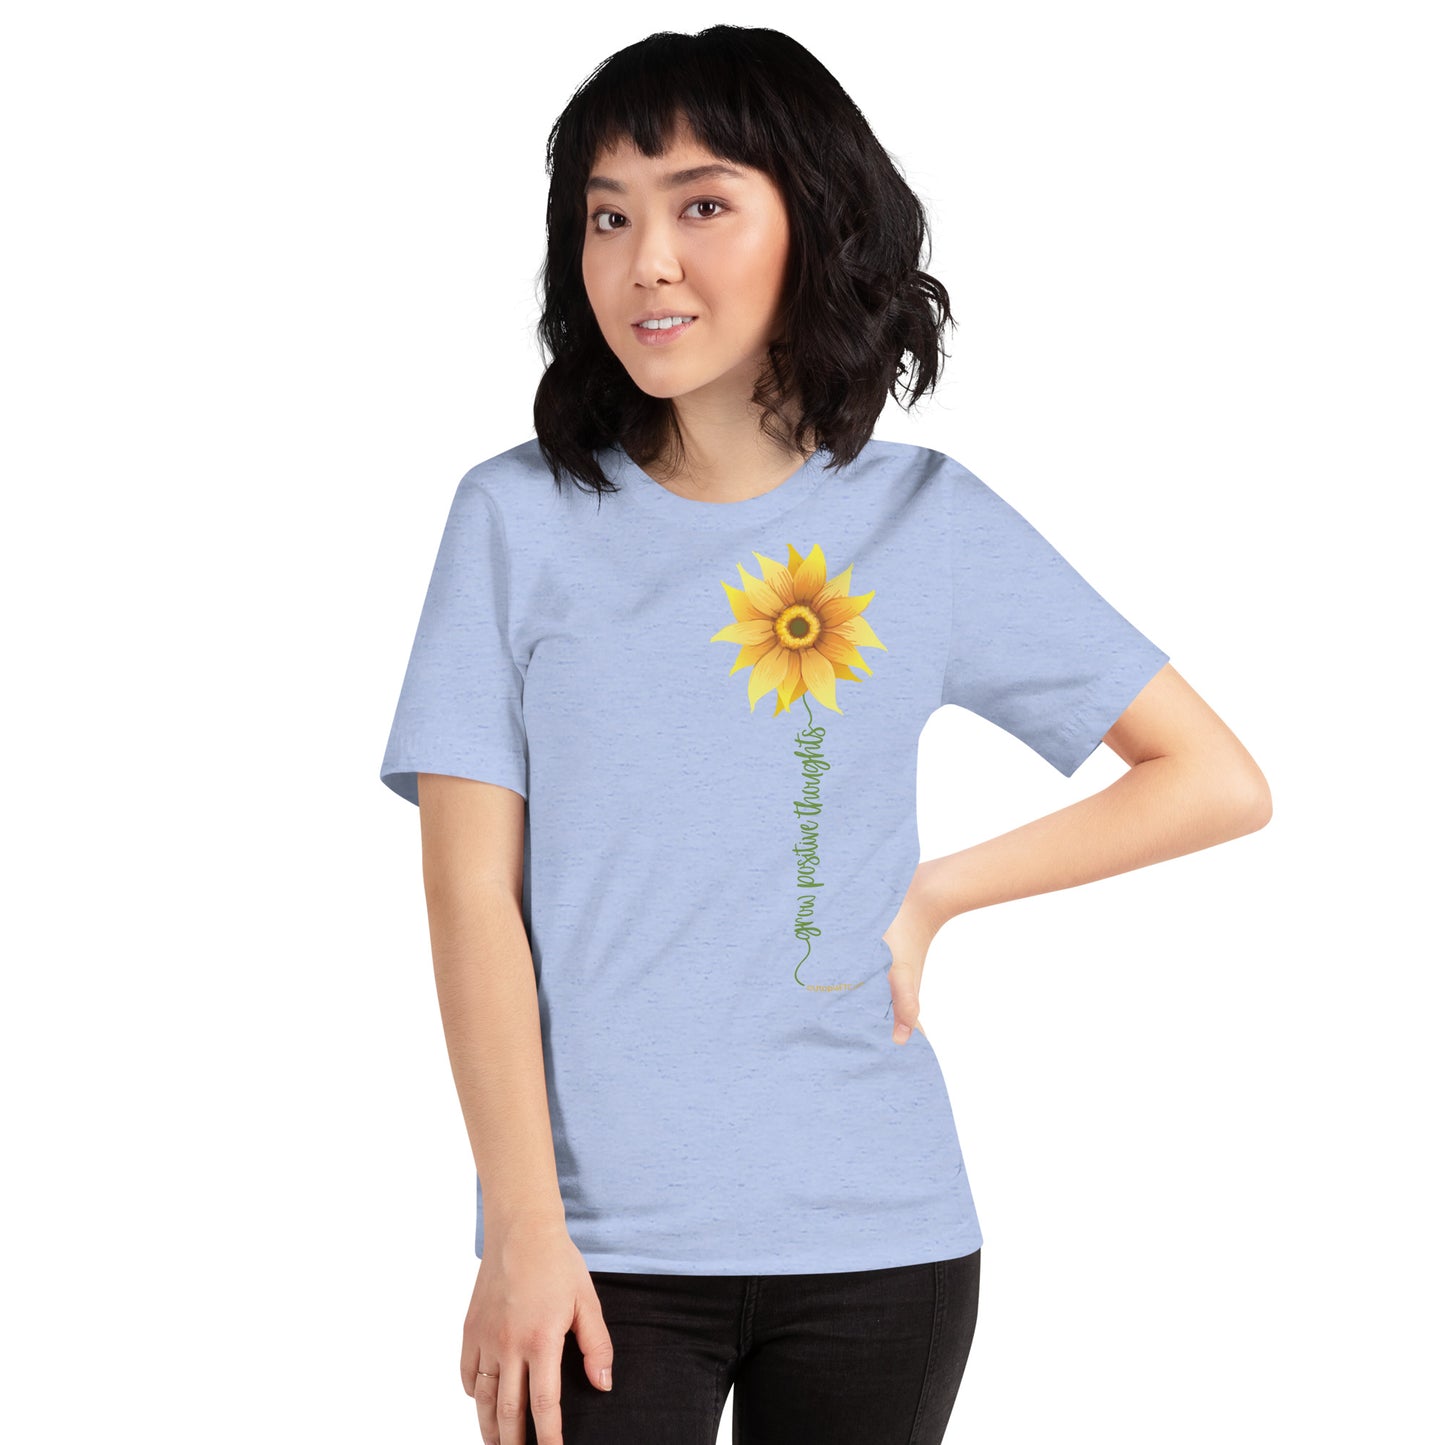 Grow Positive Thoughts Unisex T-shirt